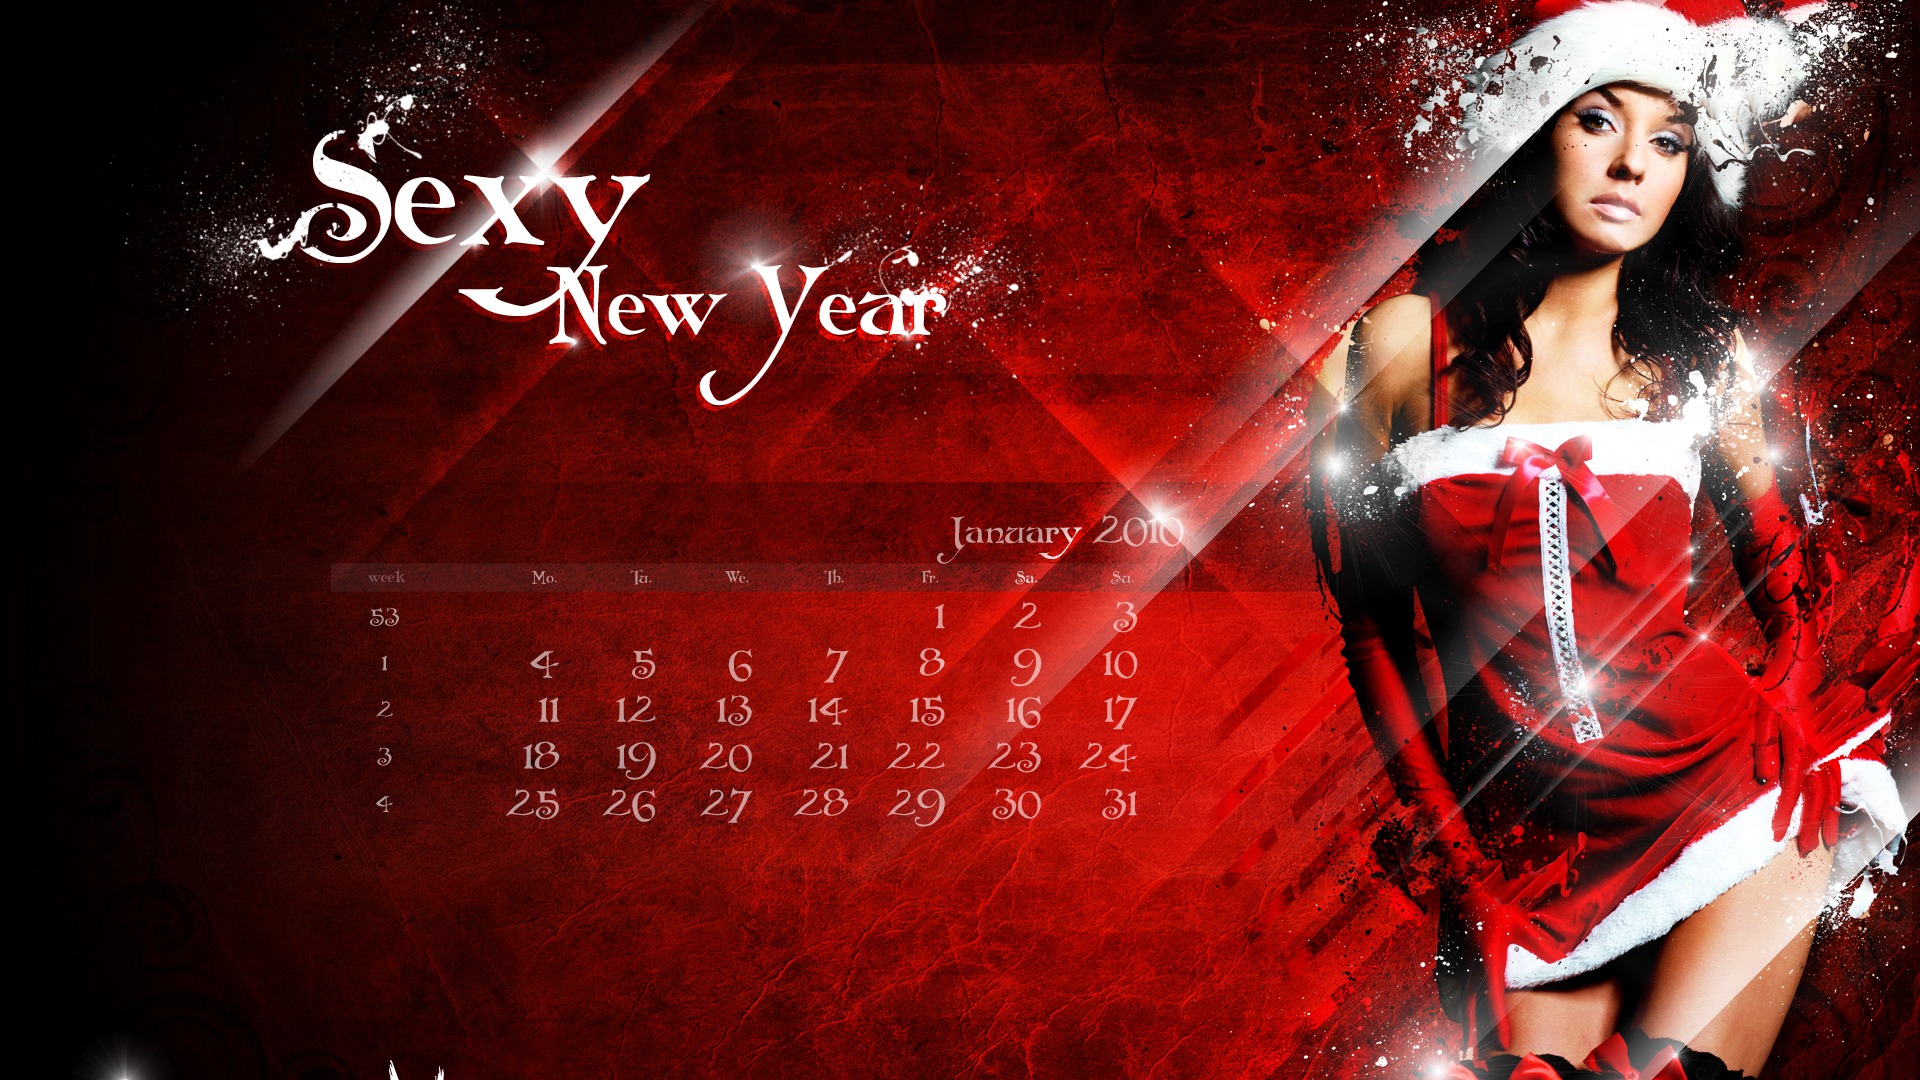 Microsoft Official Win7 New Year Wallpapers #20 - 1920x1080